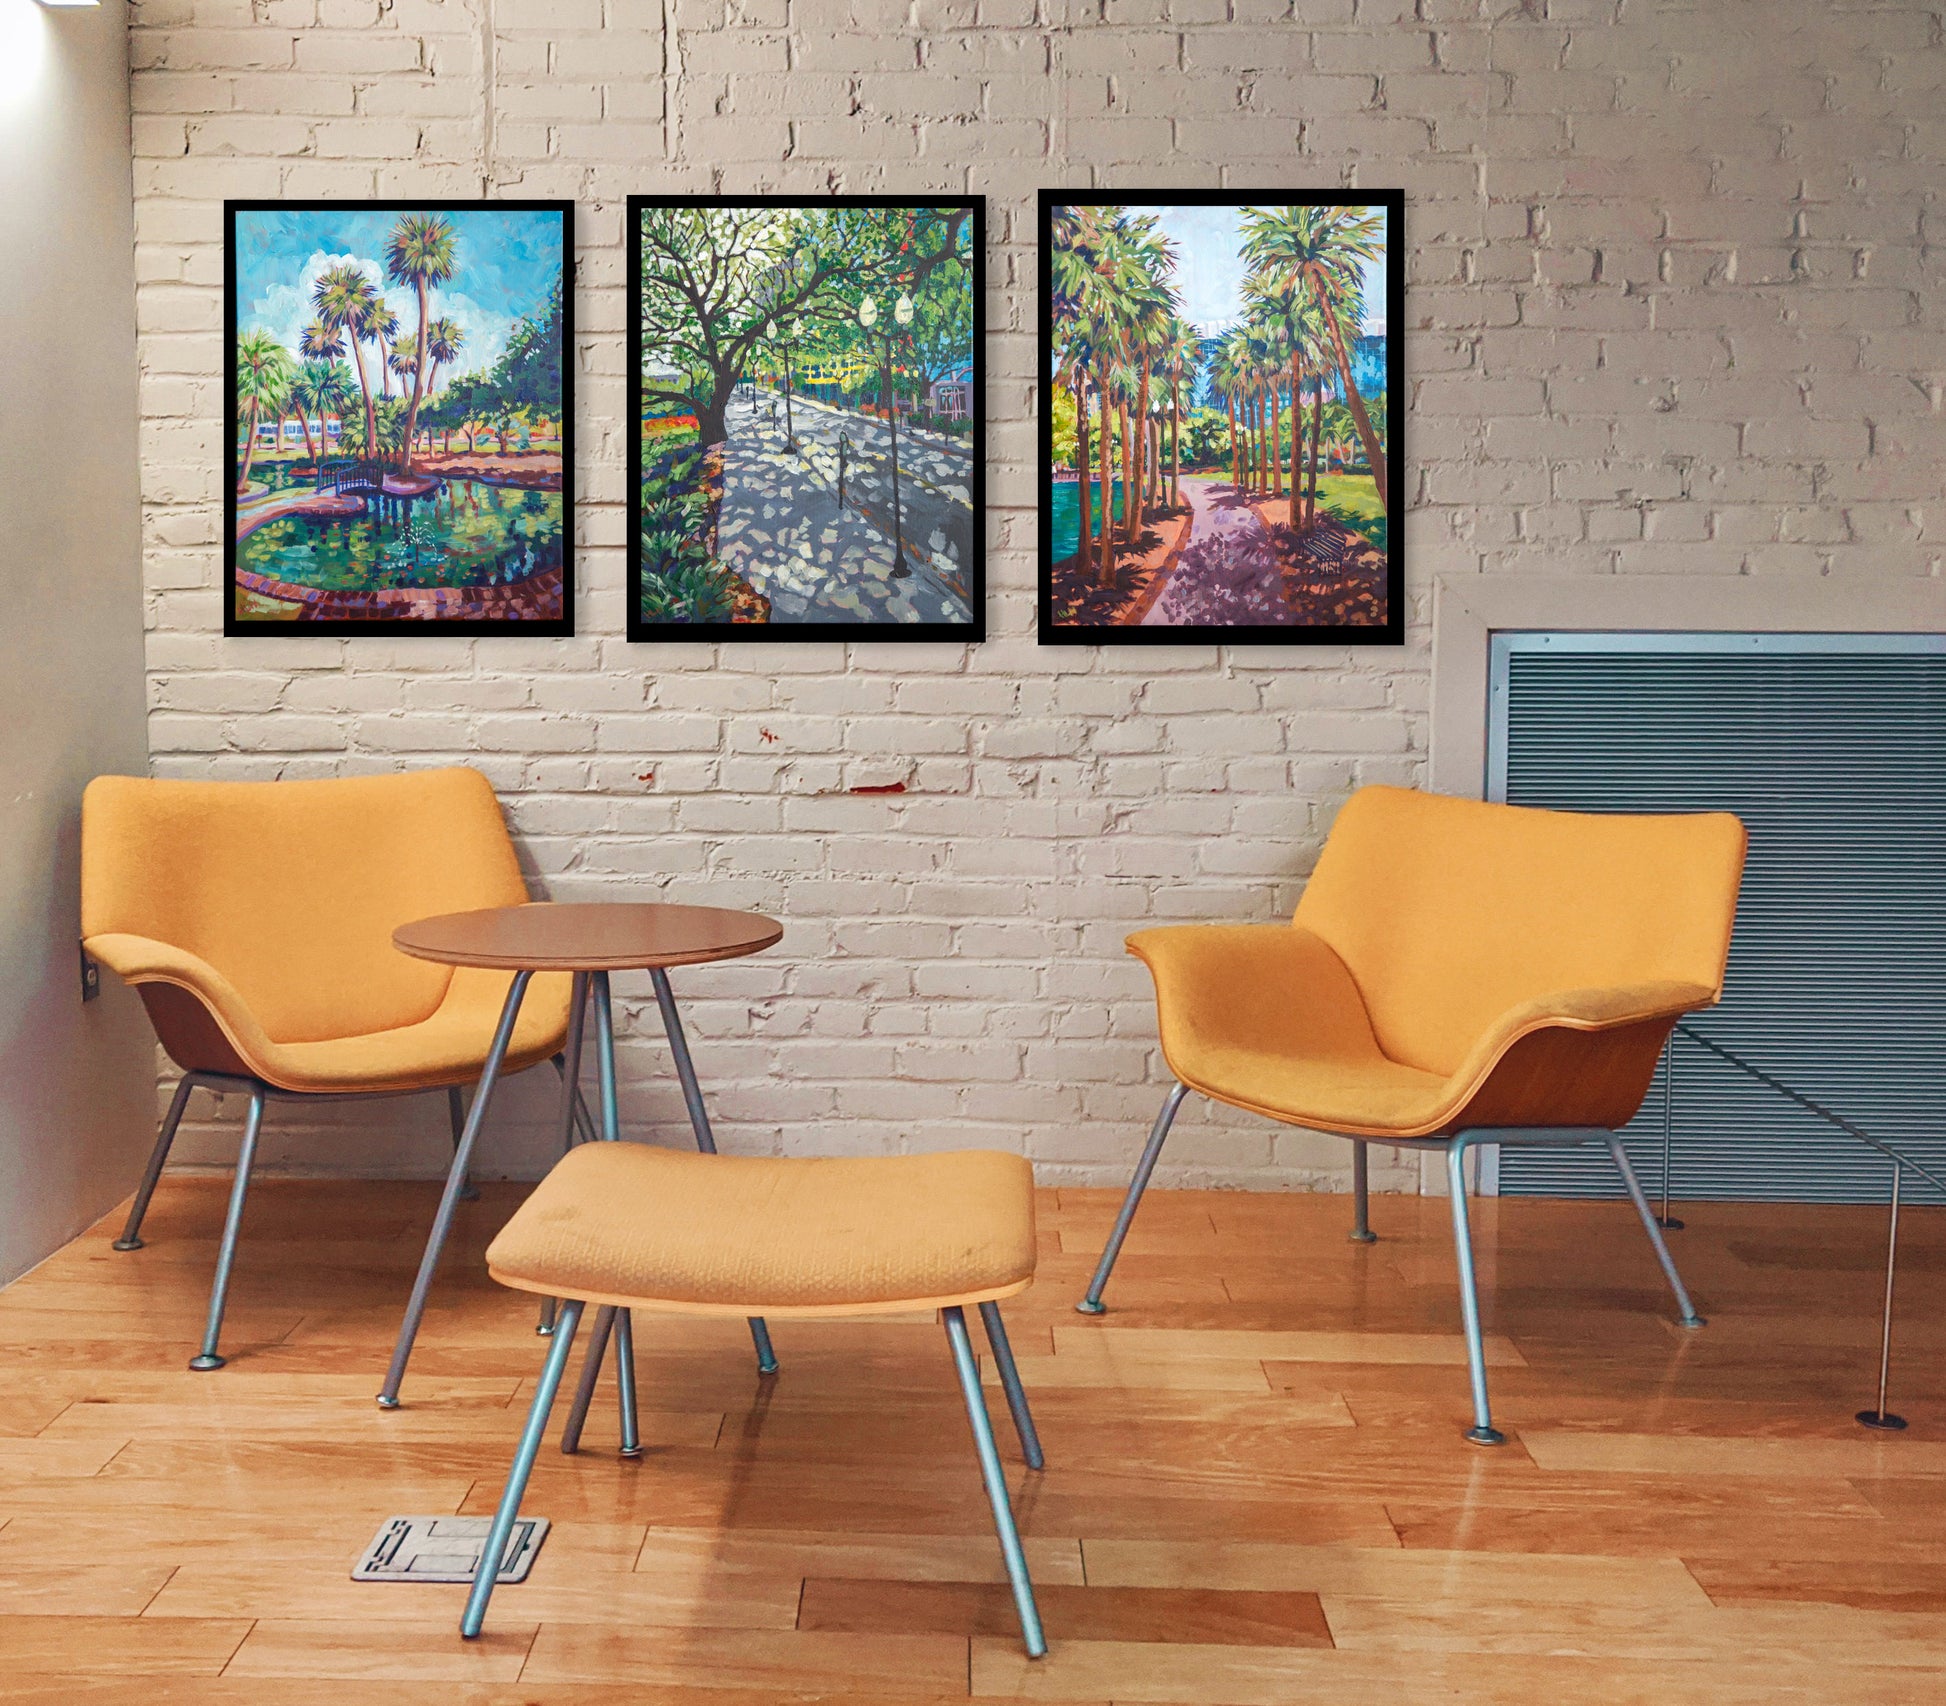 three impressionistic paintings of Lake Eola Park in Orlando Florida on the wall of sitting area with chairs and table